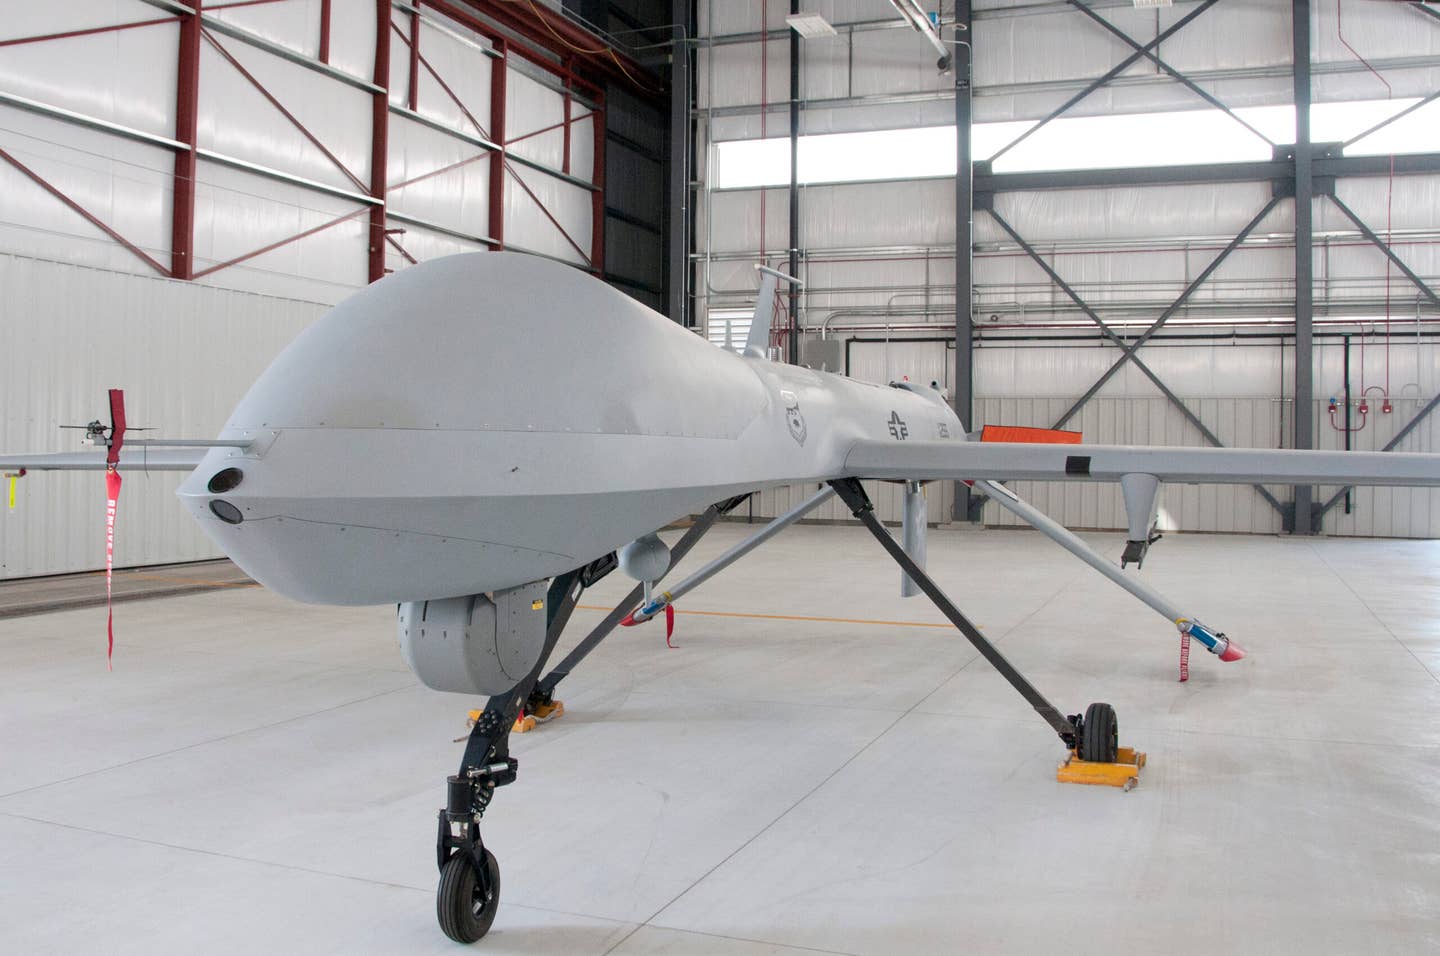 An MQ-1 Predator belonging to the U.S. Air Force 163rd Reconnaissance Wing of the California Air National Guard. <em>Credit: U.S. Air Force photo by Master Sgt. Julie Avey</em>